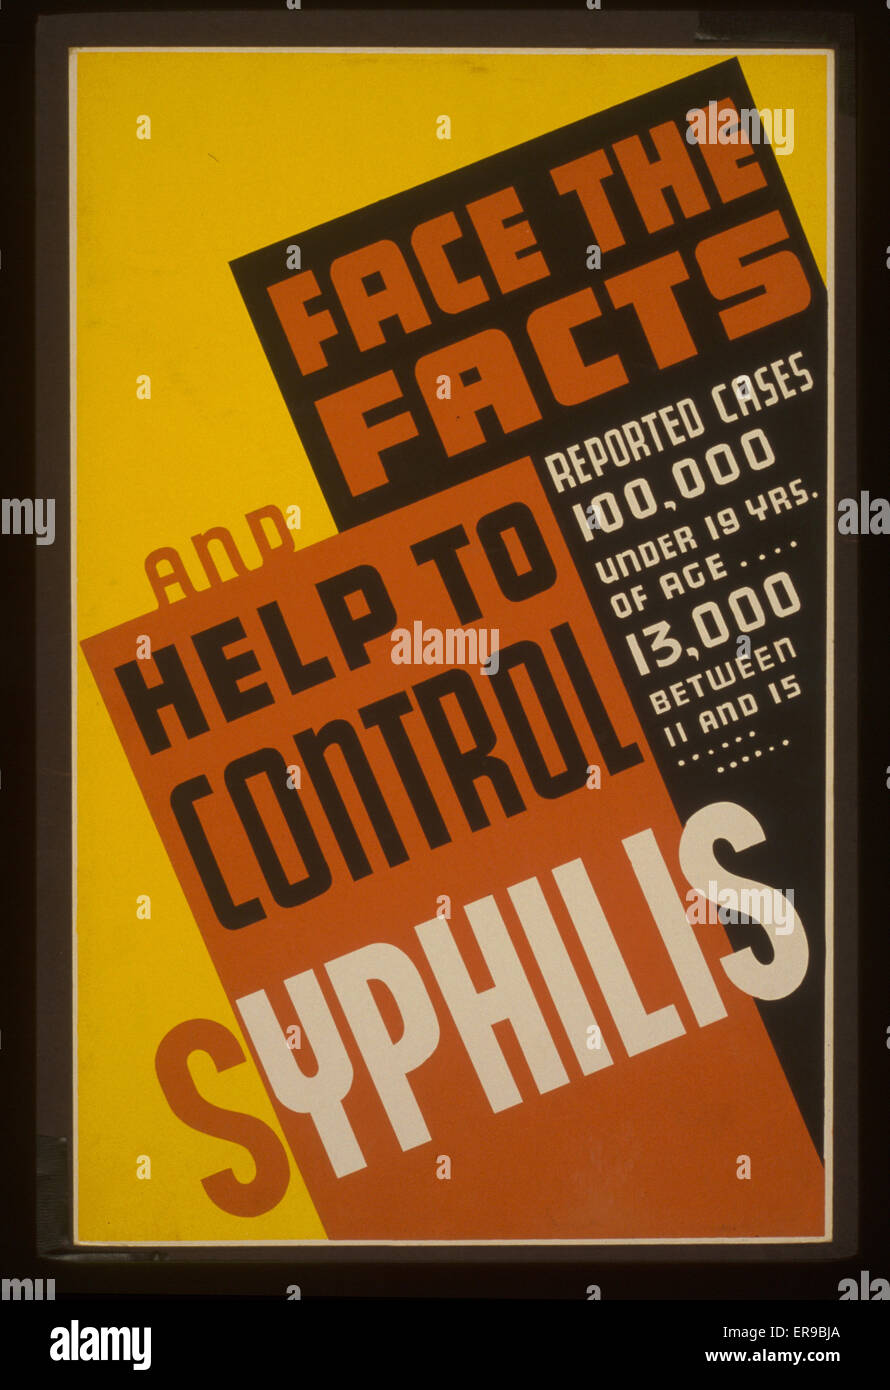 Face the facts and help to control syphilis Reported cases 1 Stock Photo